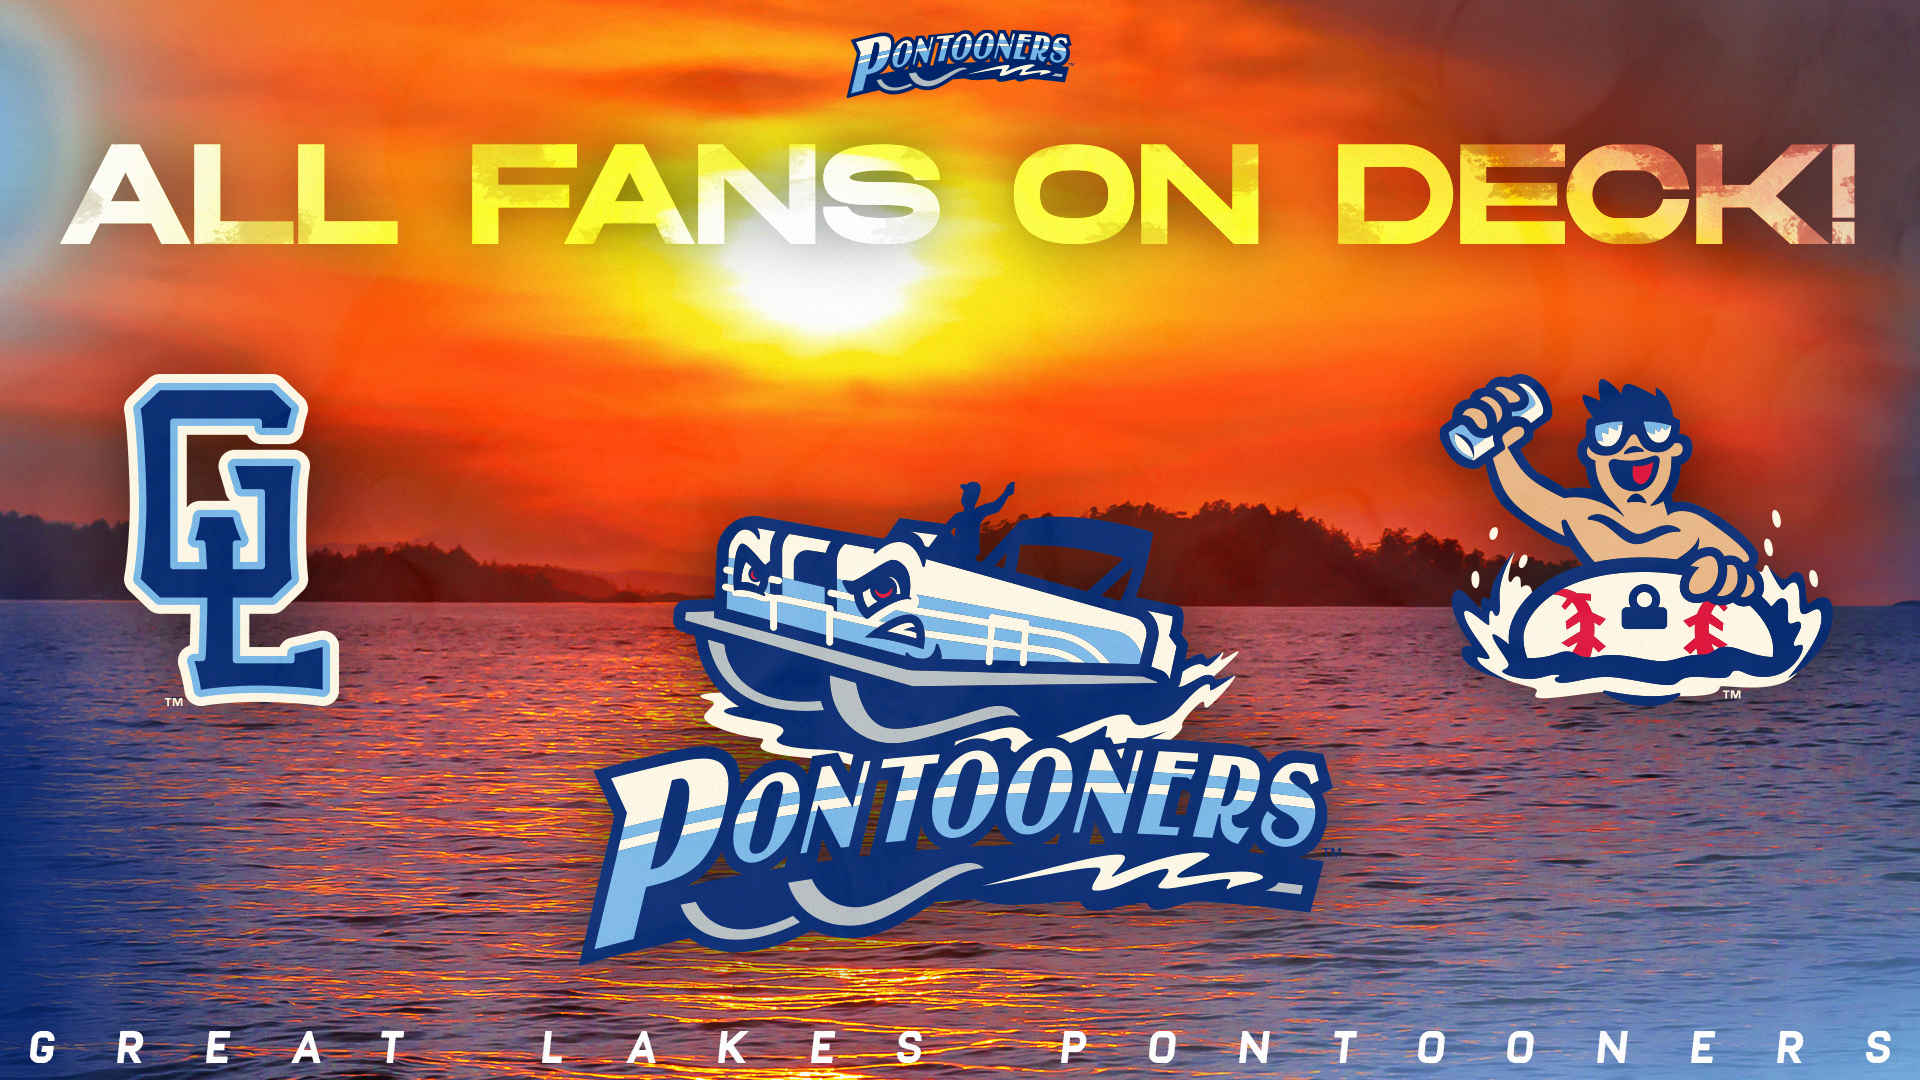 Check out these Pontooners